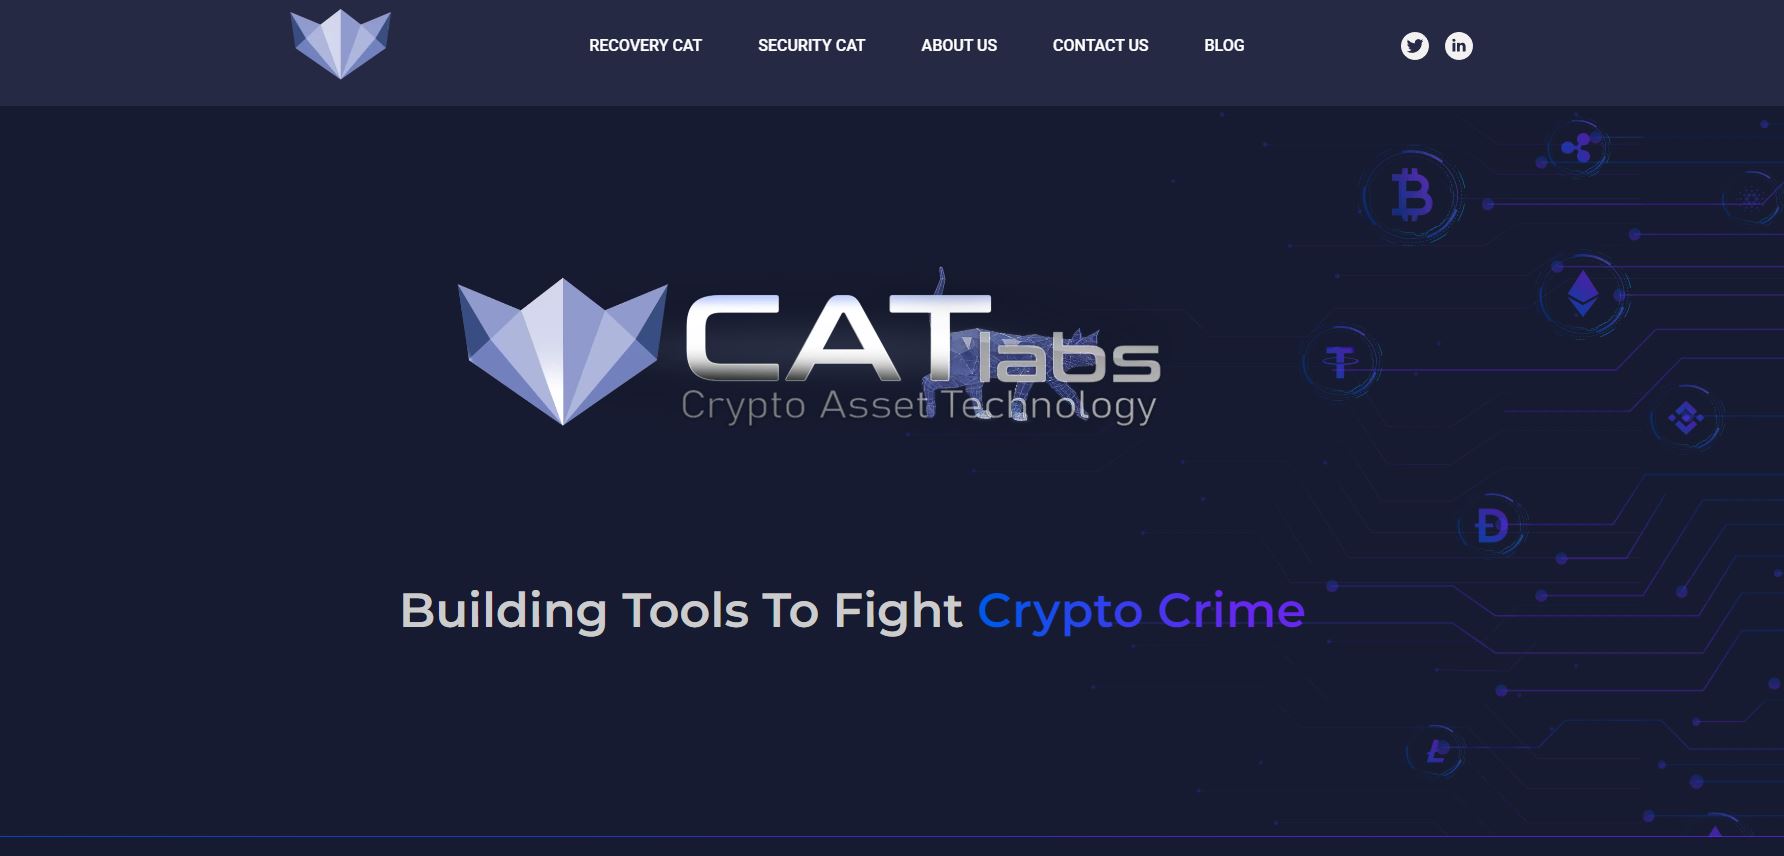 With $4.3 million in funding, CAT Labs is building tools to fight crypto crime and protect digital assets